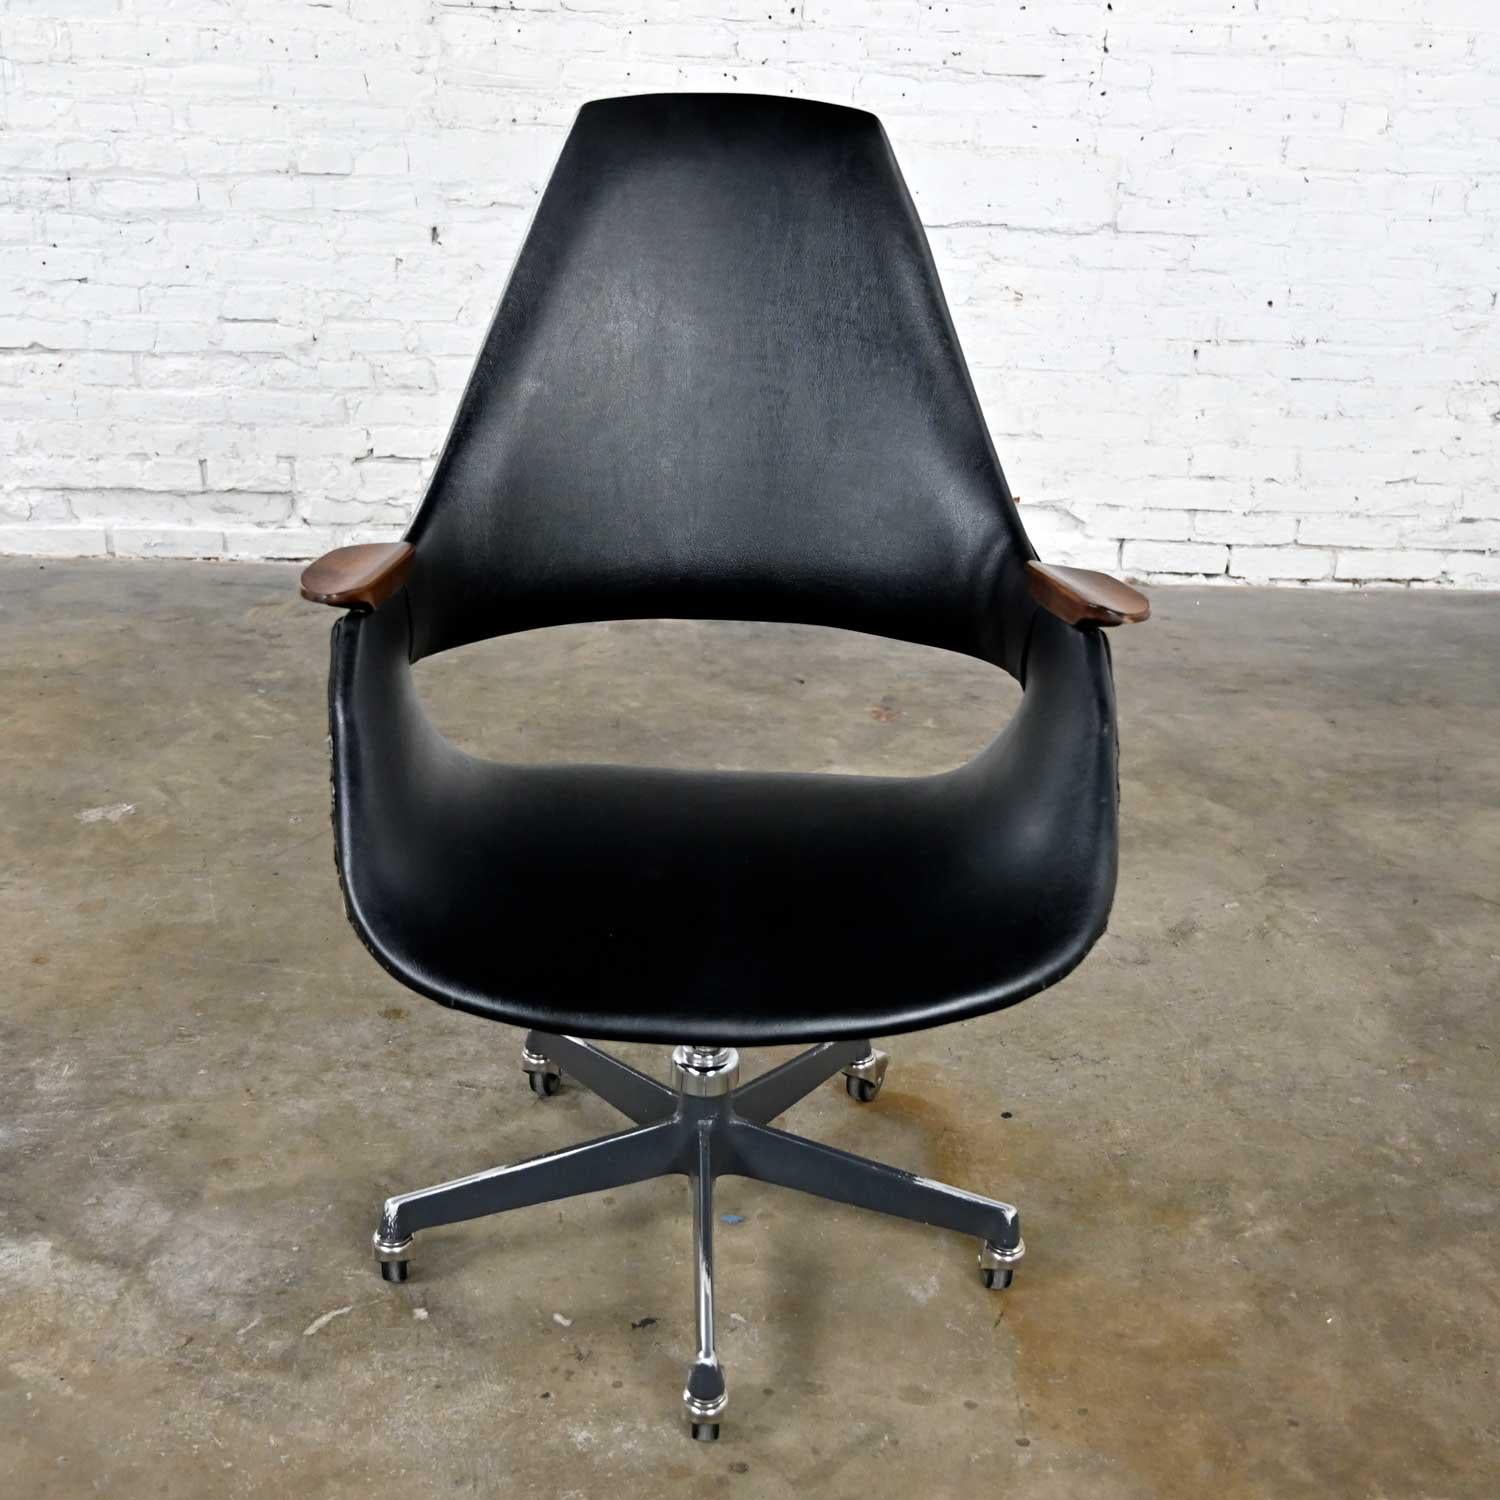 Awesome vintage Mid-Century Modern Space Age black vinyl desk armchair no. 2635 with wood arms and a five-prong cast aluminum base with casters by Arthur Umanoff for Madison Furniture. Beautiful condition, keeping in mind that this is vintage and